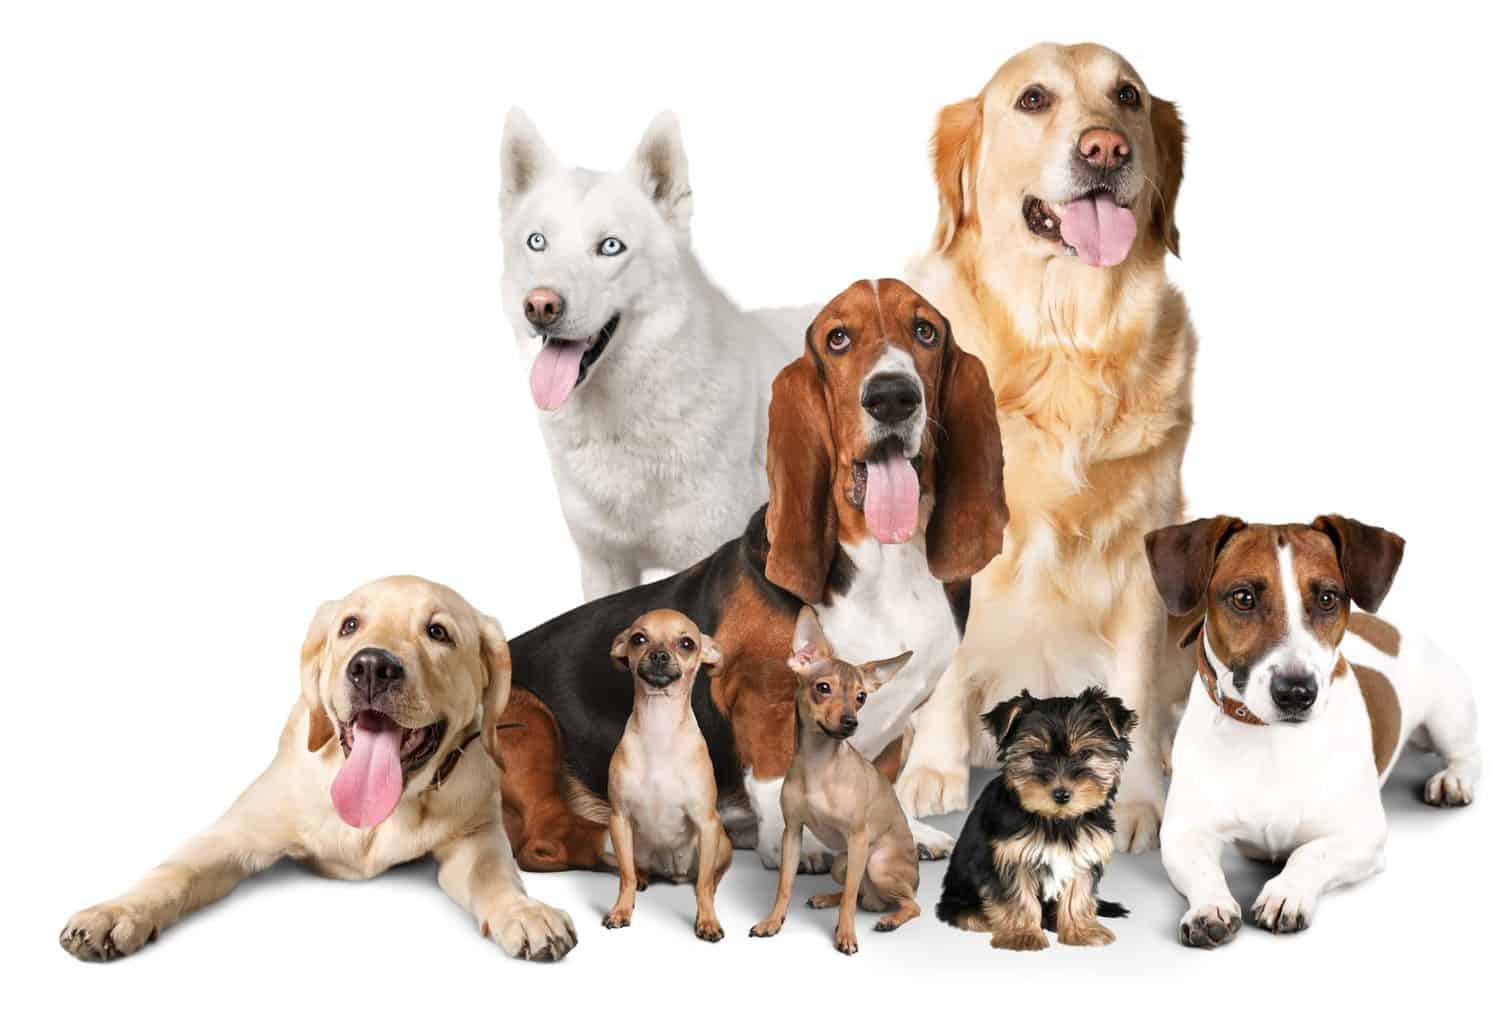 Photo illustration of a collection of dogs of different sizes. Wondering how big your dog will get? Start by analyzing its paws. If its paws appear too big for its body at 16 weeks, it will grow bigger.